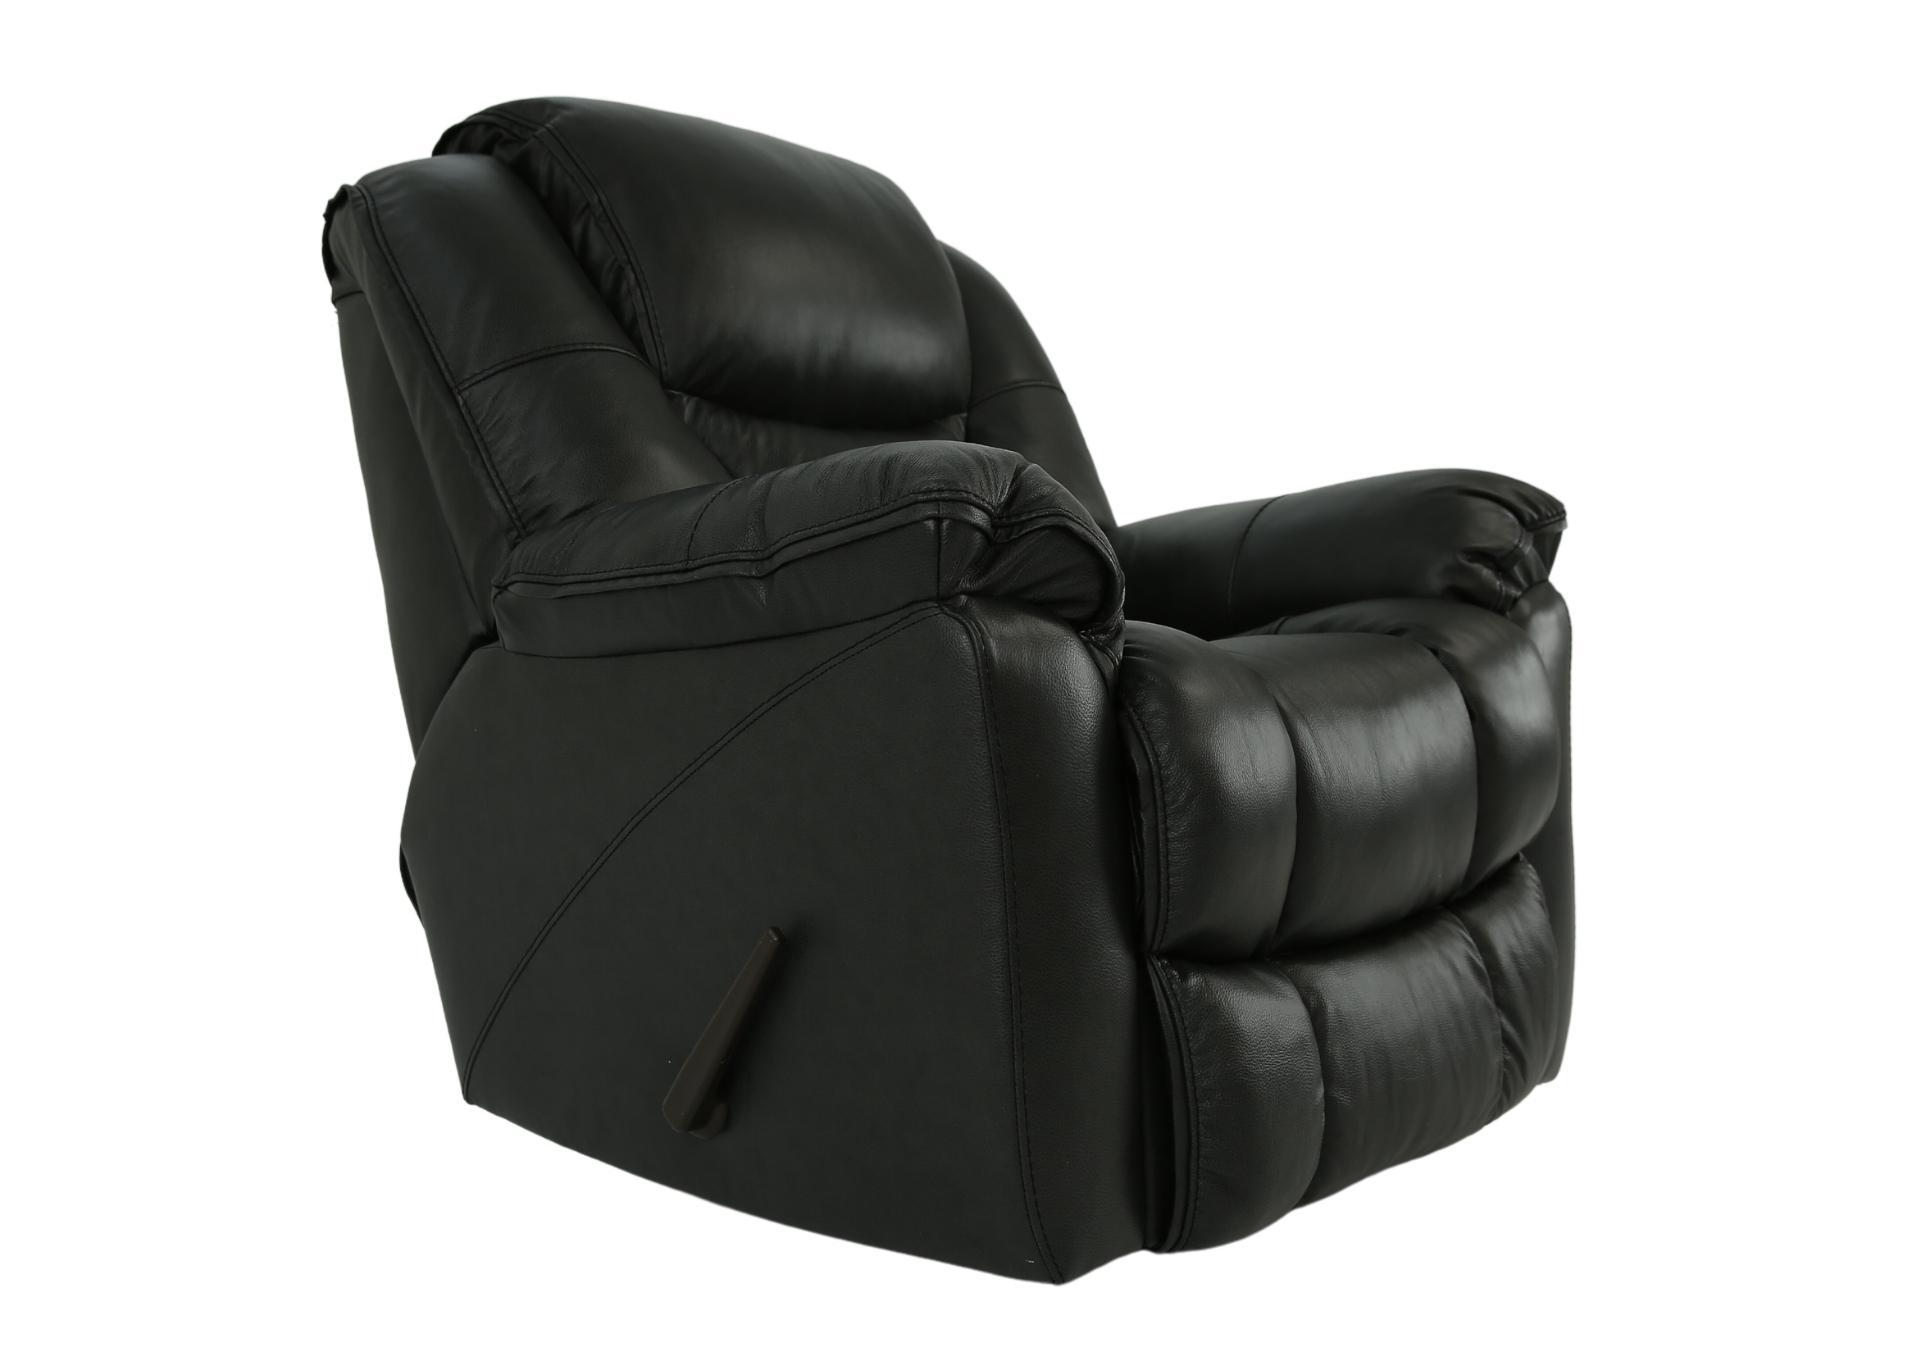 MUSTANG CHARCOAL LEATHER ROCKER RECLINER,HOMESTRETCH